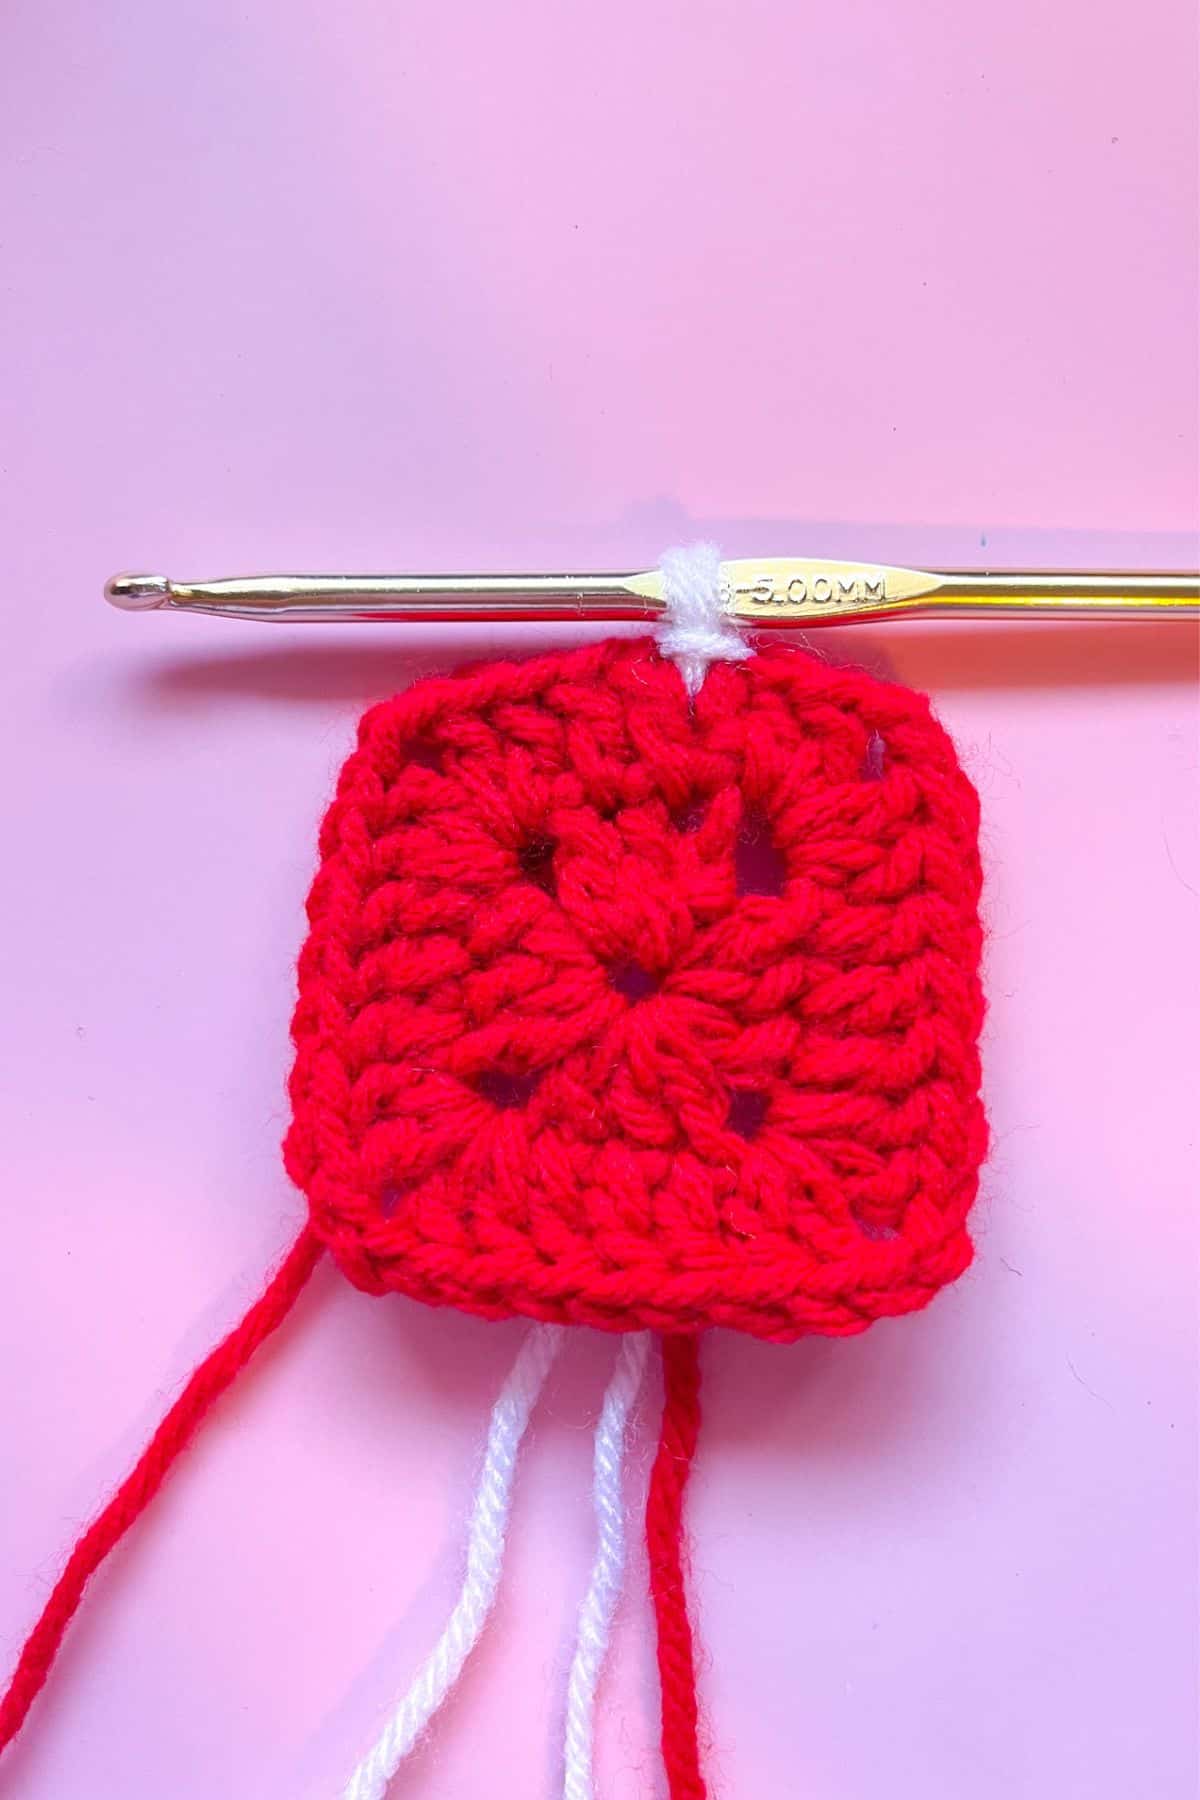 Crochet Perfect Granny Squares with Red Heart All in One Yarn